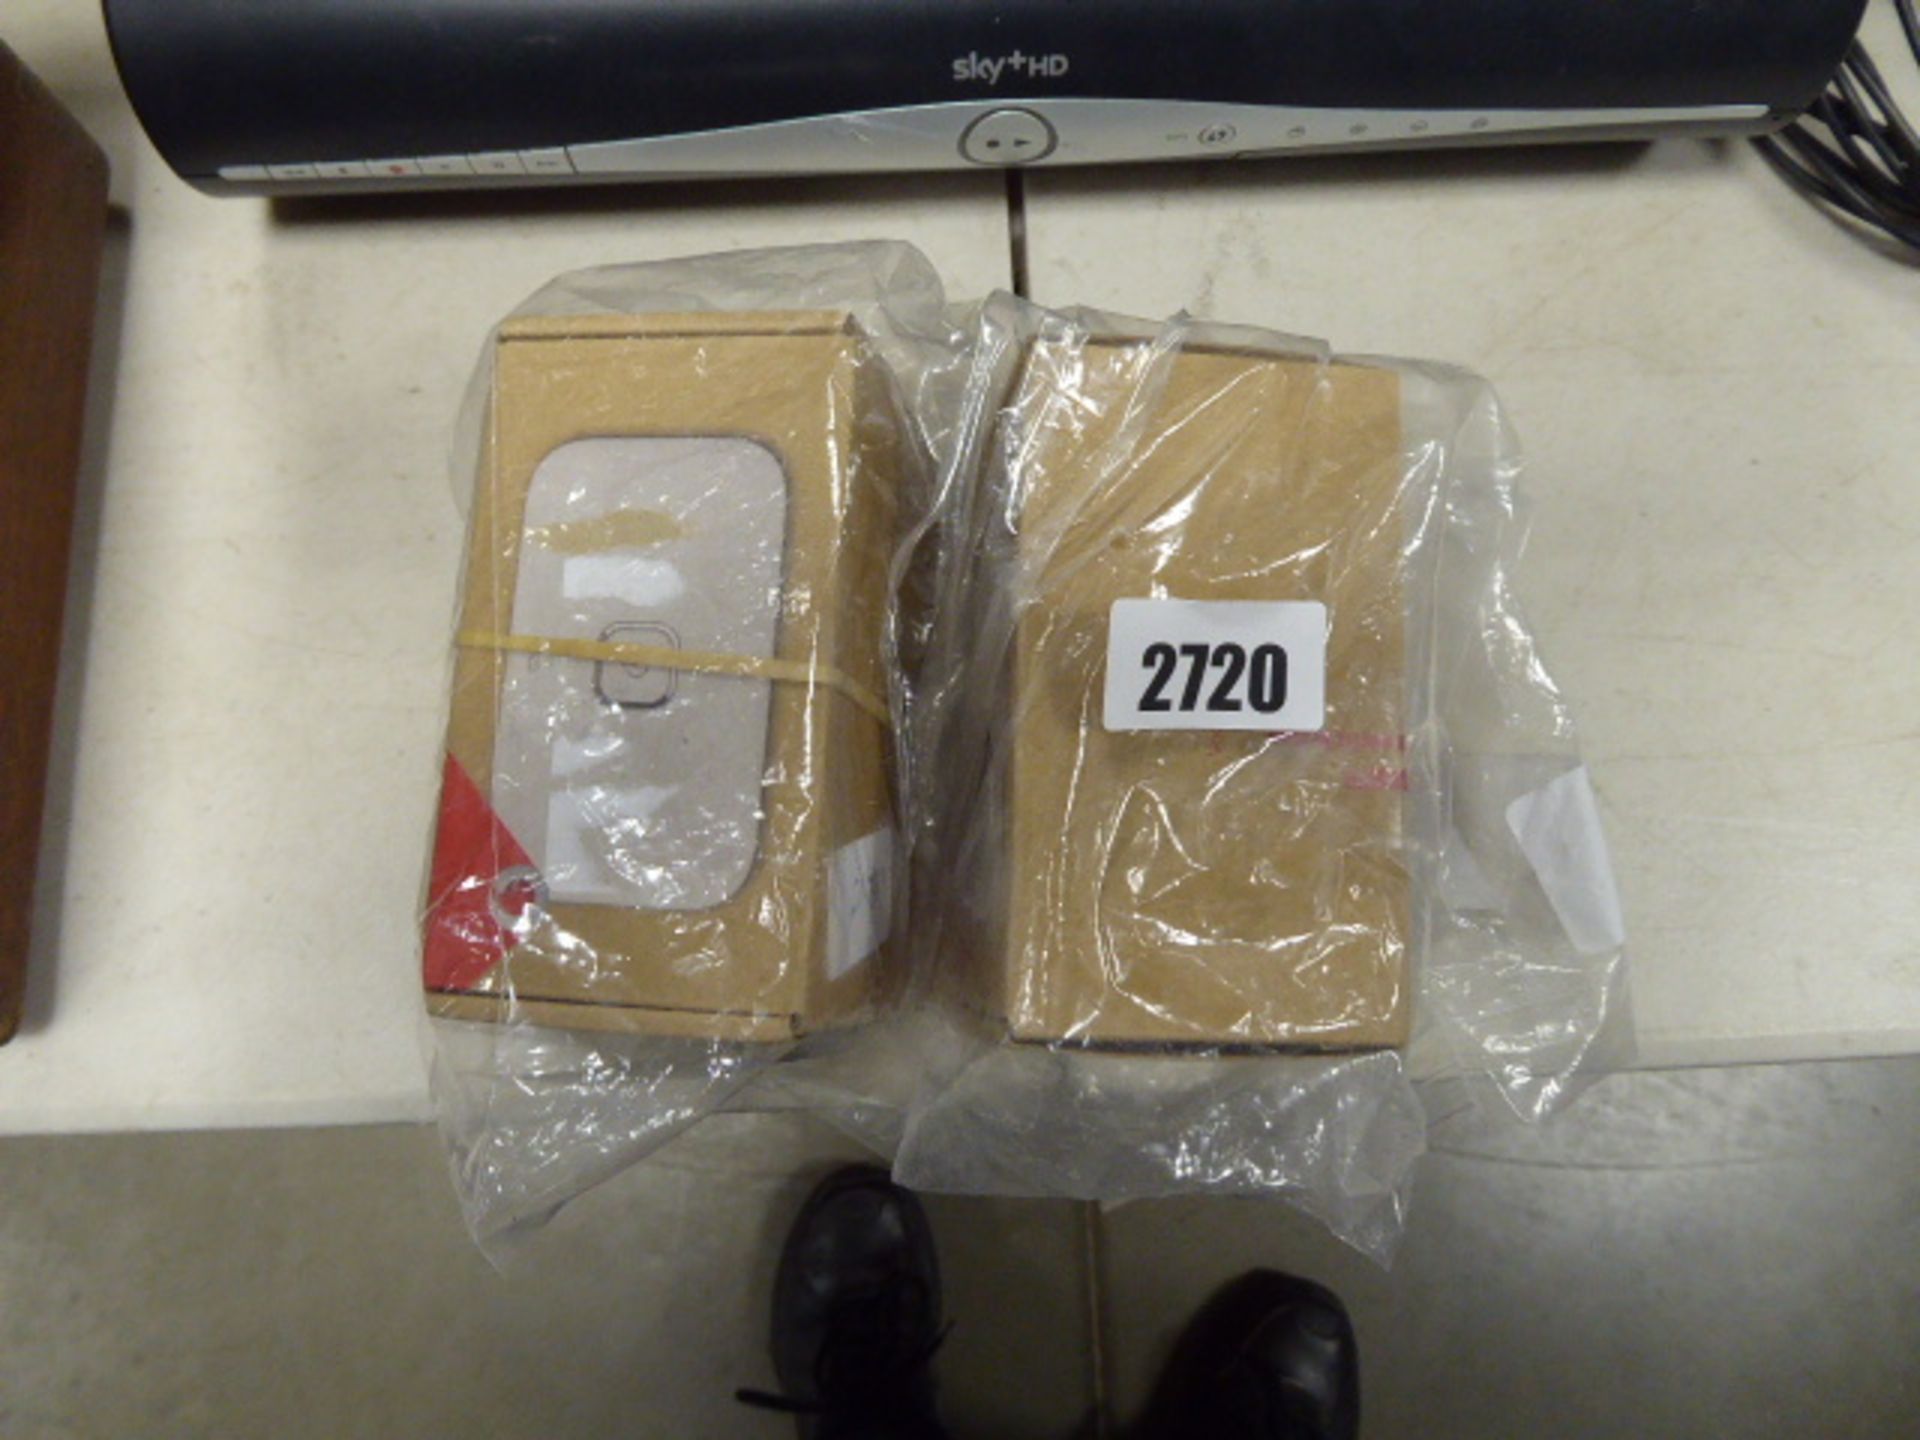 2 Vodaphone wireless 4G modules in boxes